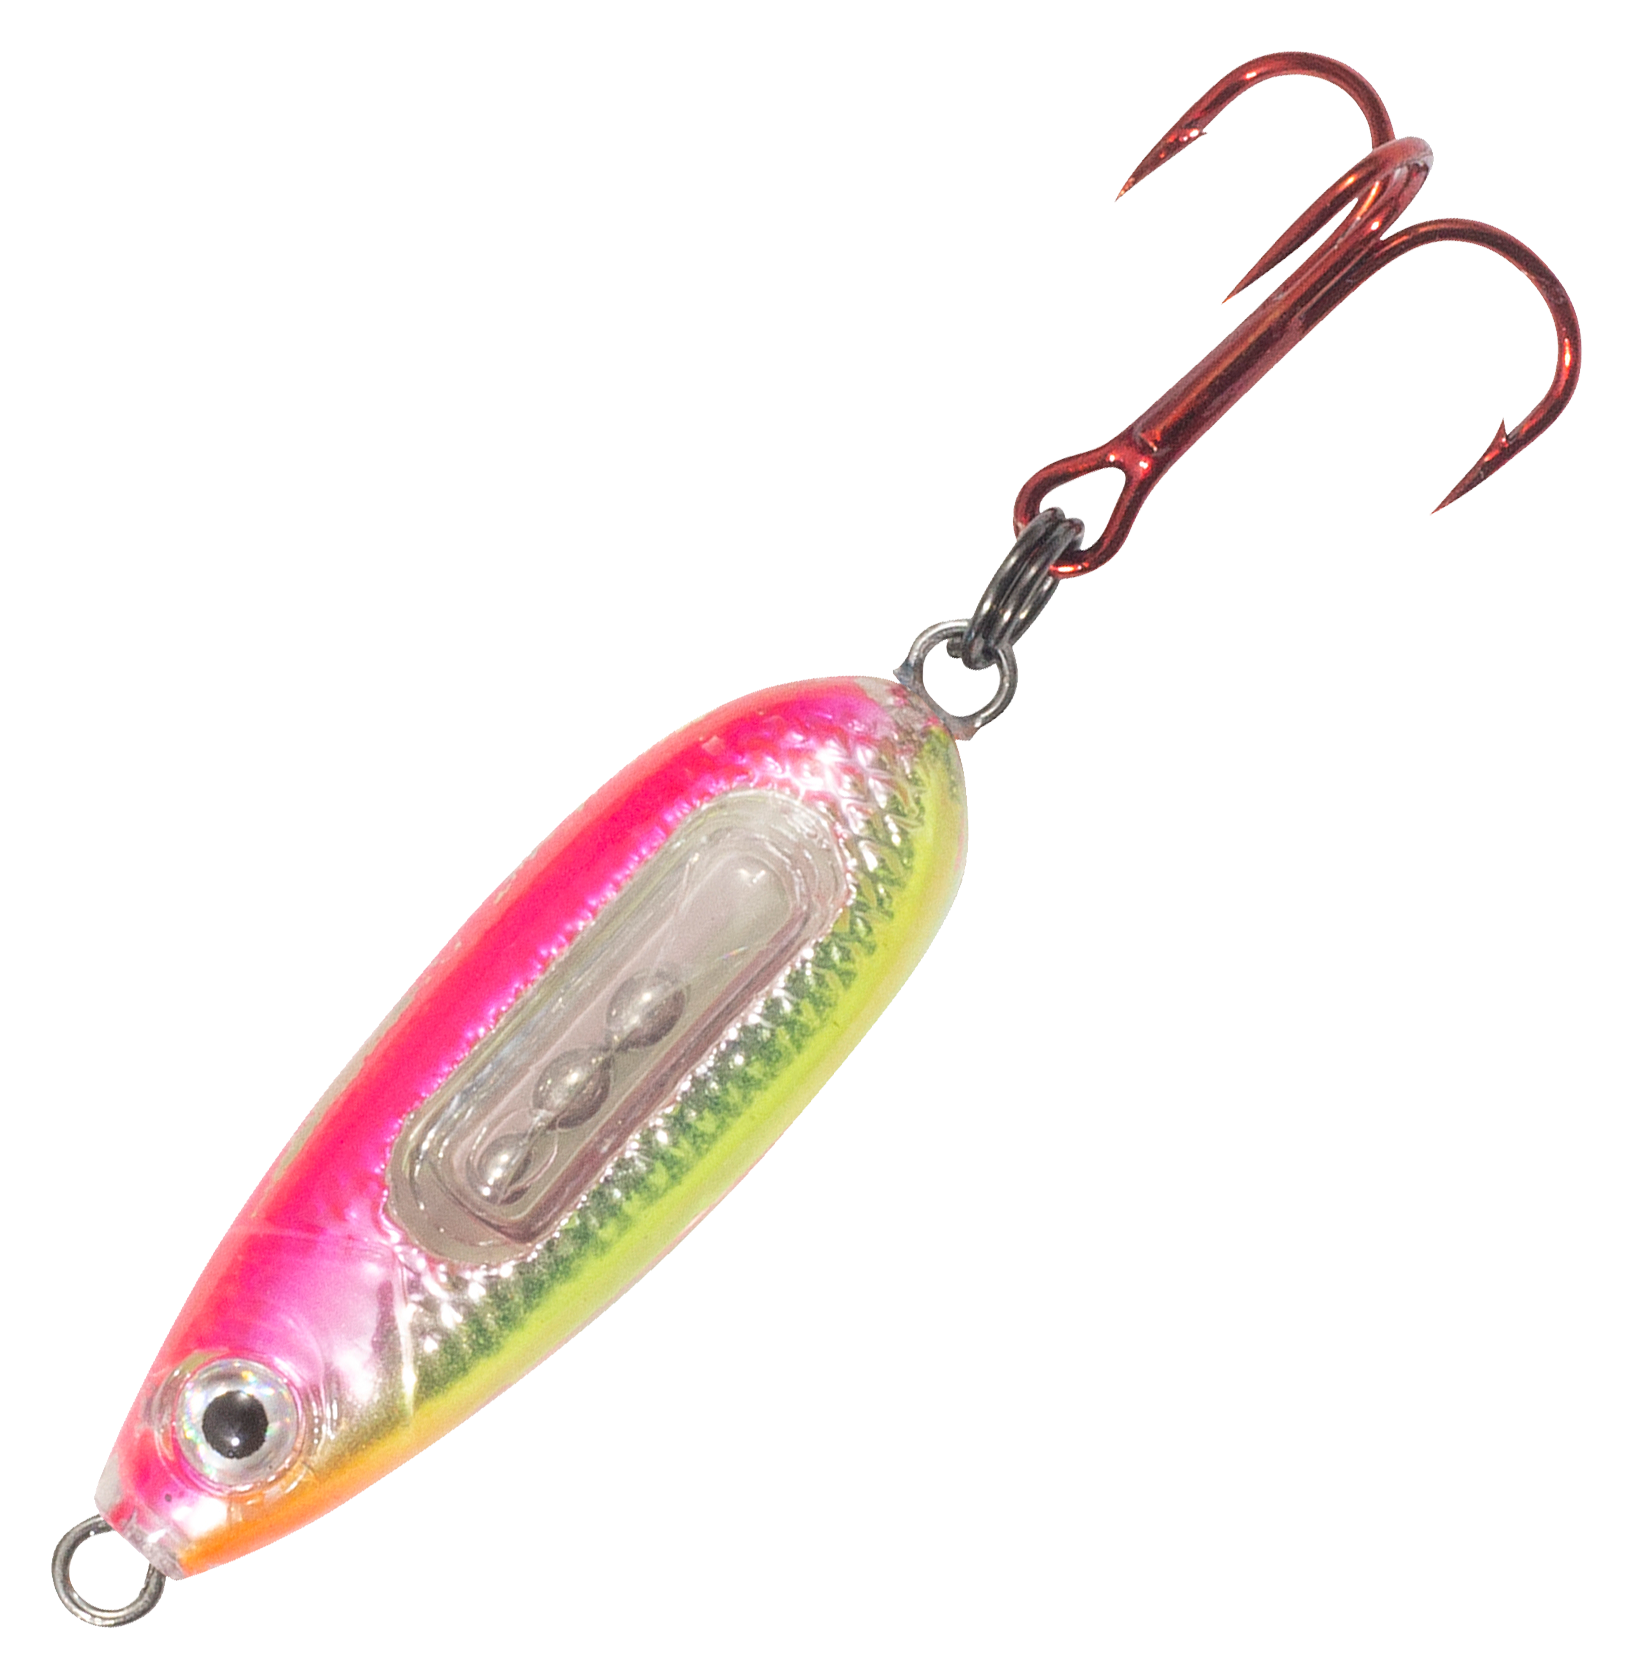 Northland Fishing Tackle Glass Buck-Shot Spoon - 3/32 oz - Pink Silver